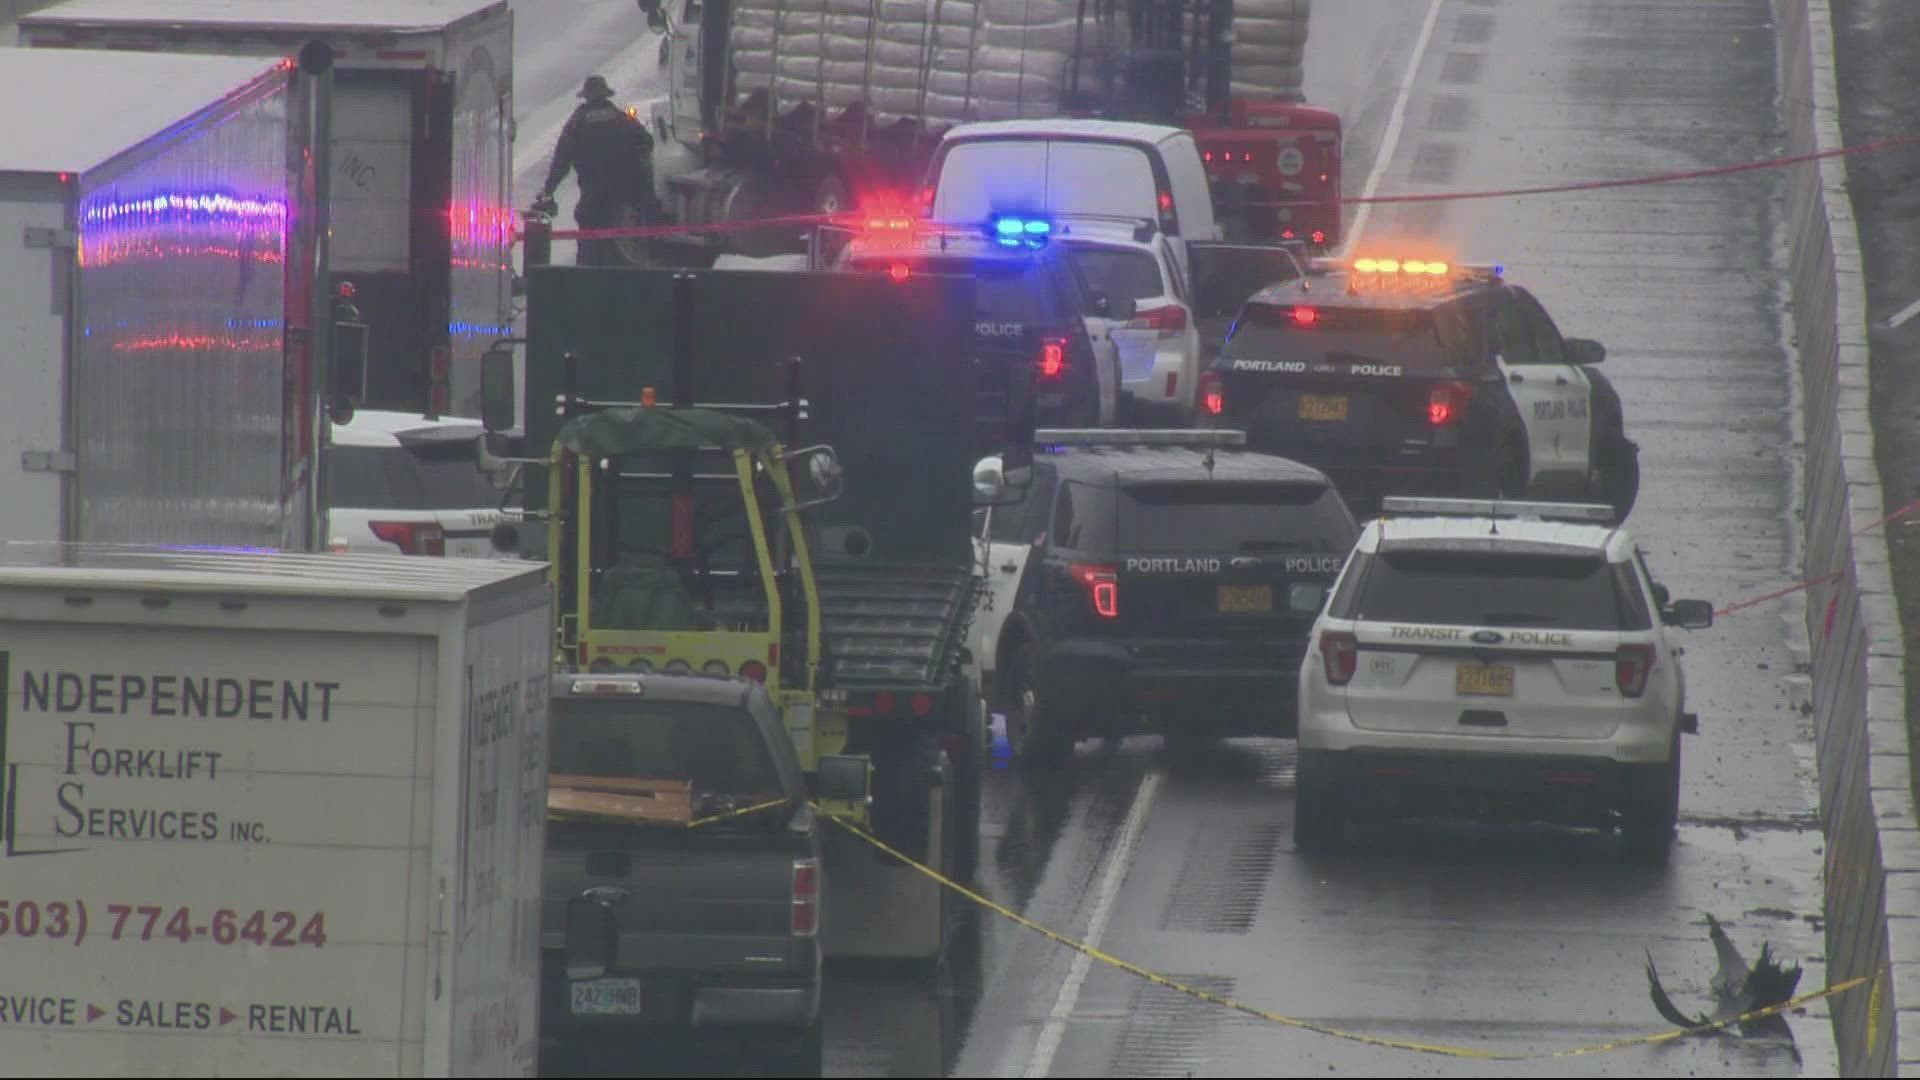 I-5 SB was blocked for hours following the shooting.